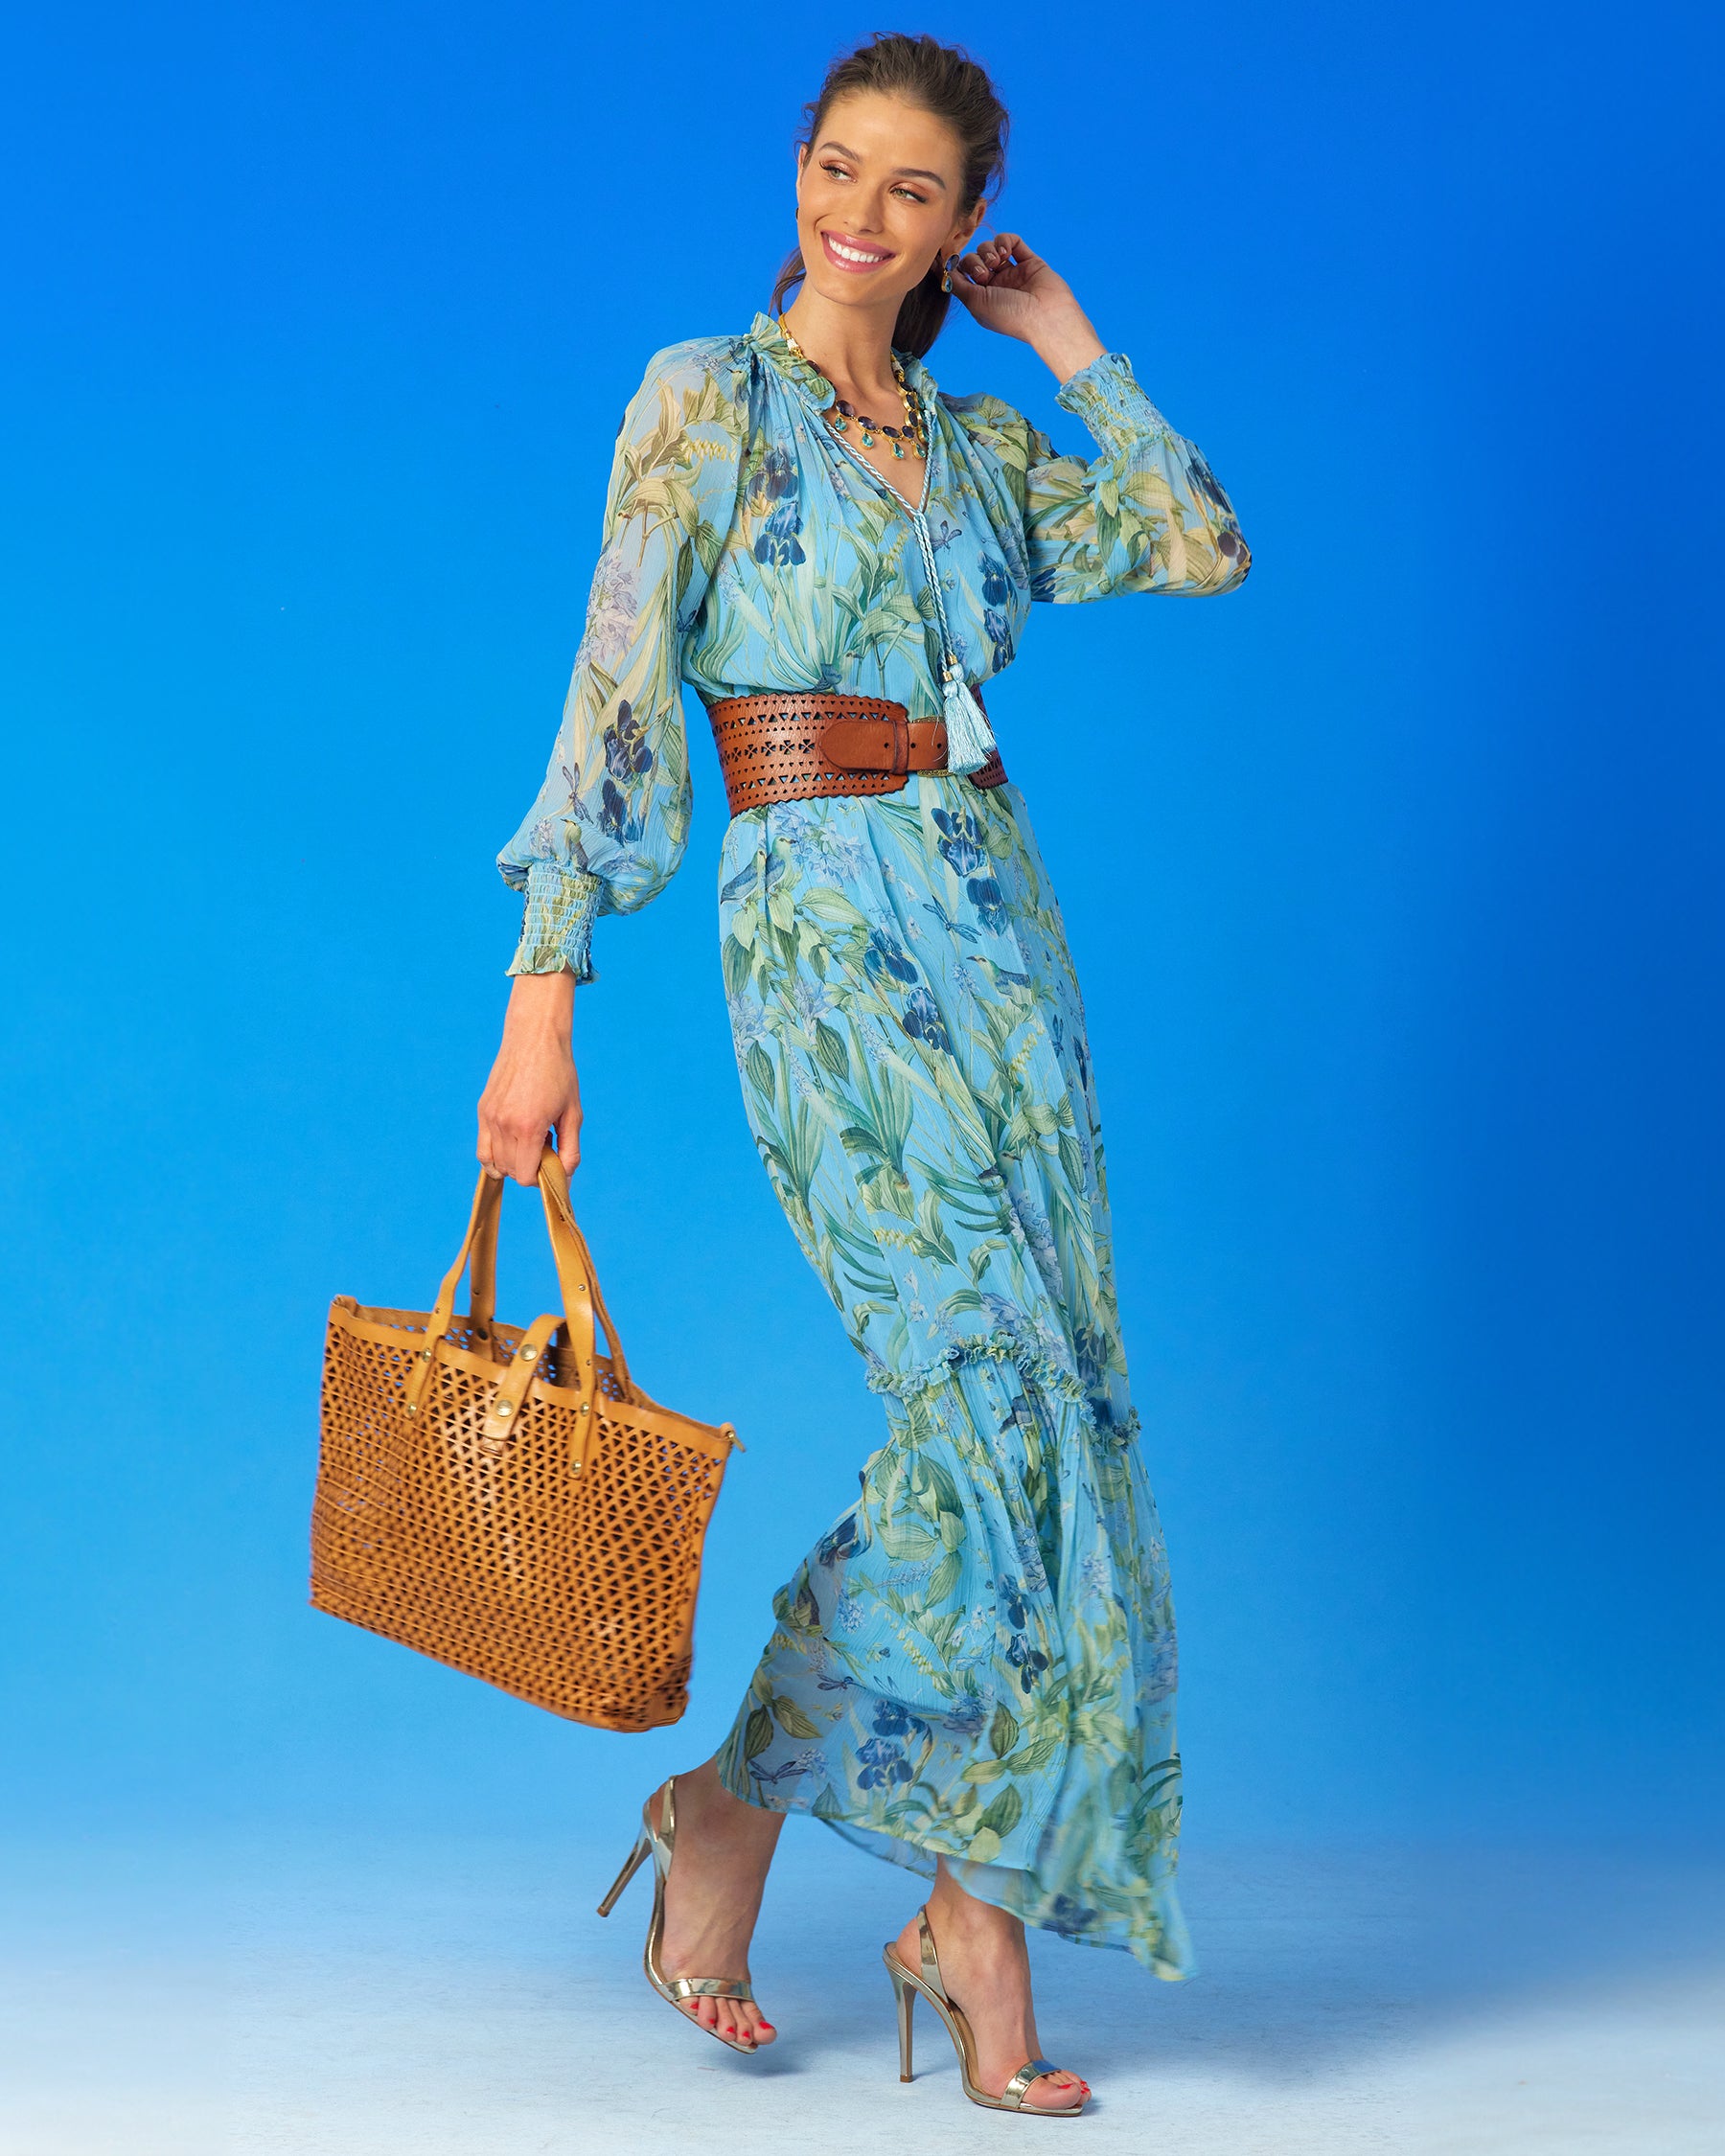 Campomaggi Malibu Wide Corset Pyramid Laser Cut Belt in Dark Brown worn with the Celine Maxi Crinkle Chiffon Dress in Magical Garden and the Campomaggi Malibu Pyramid Cut Tote Bag in Tan-full view